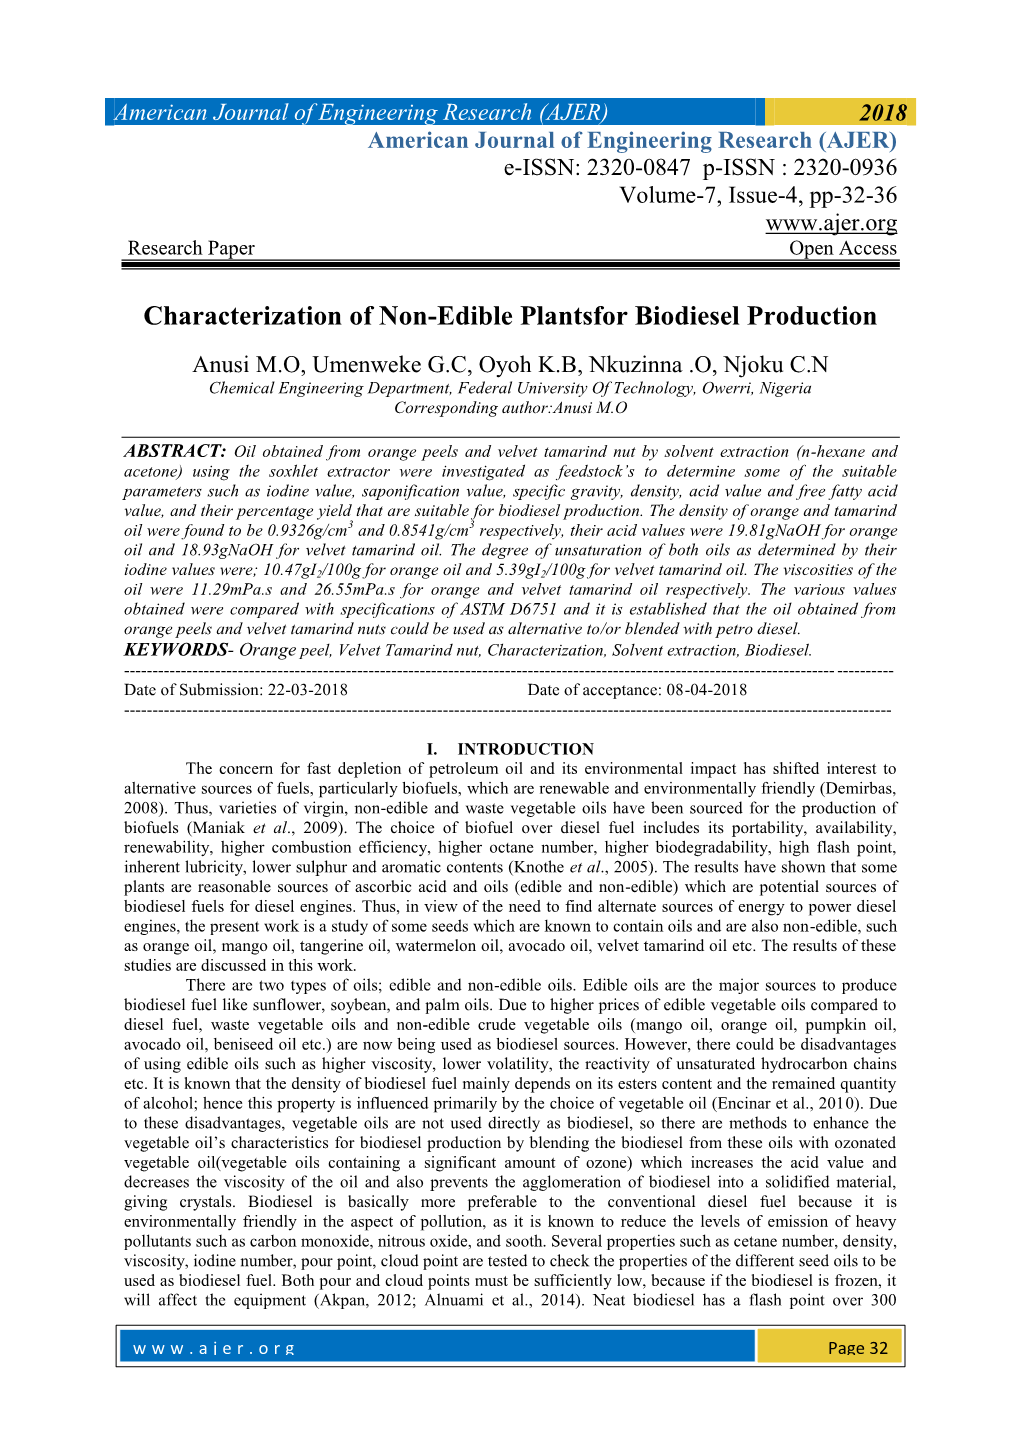 Characterization of Non-Edible Plantsfor Biodiesel Production